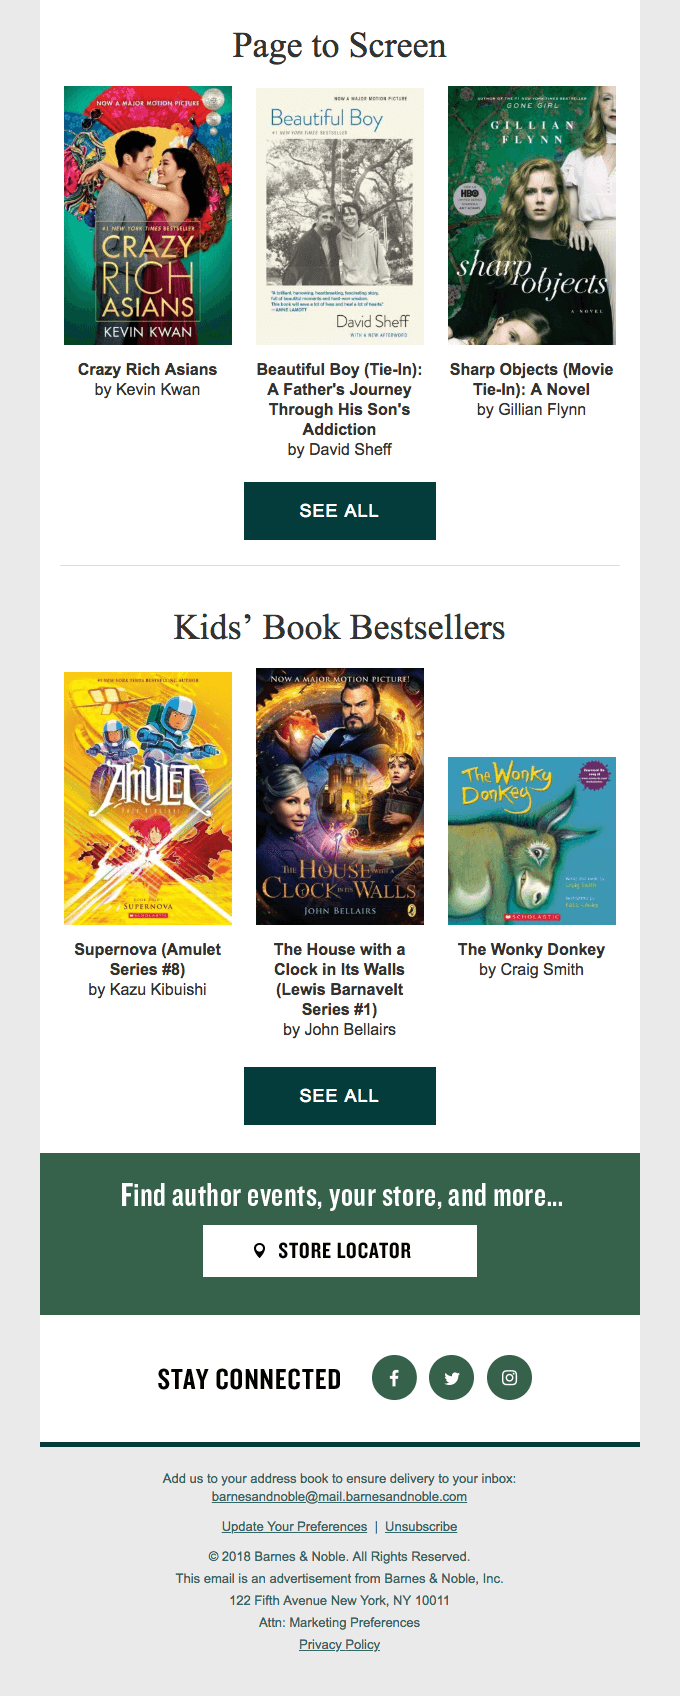 Barnes and Noble with their welcome email